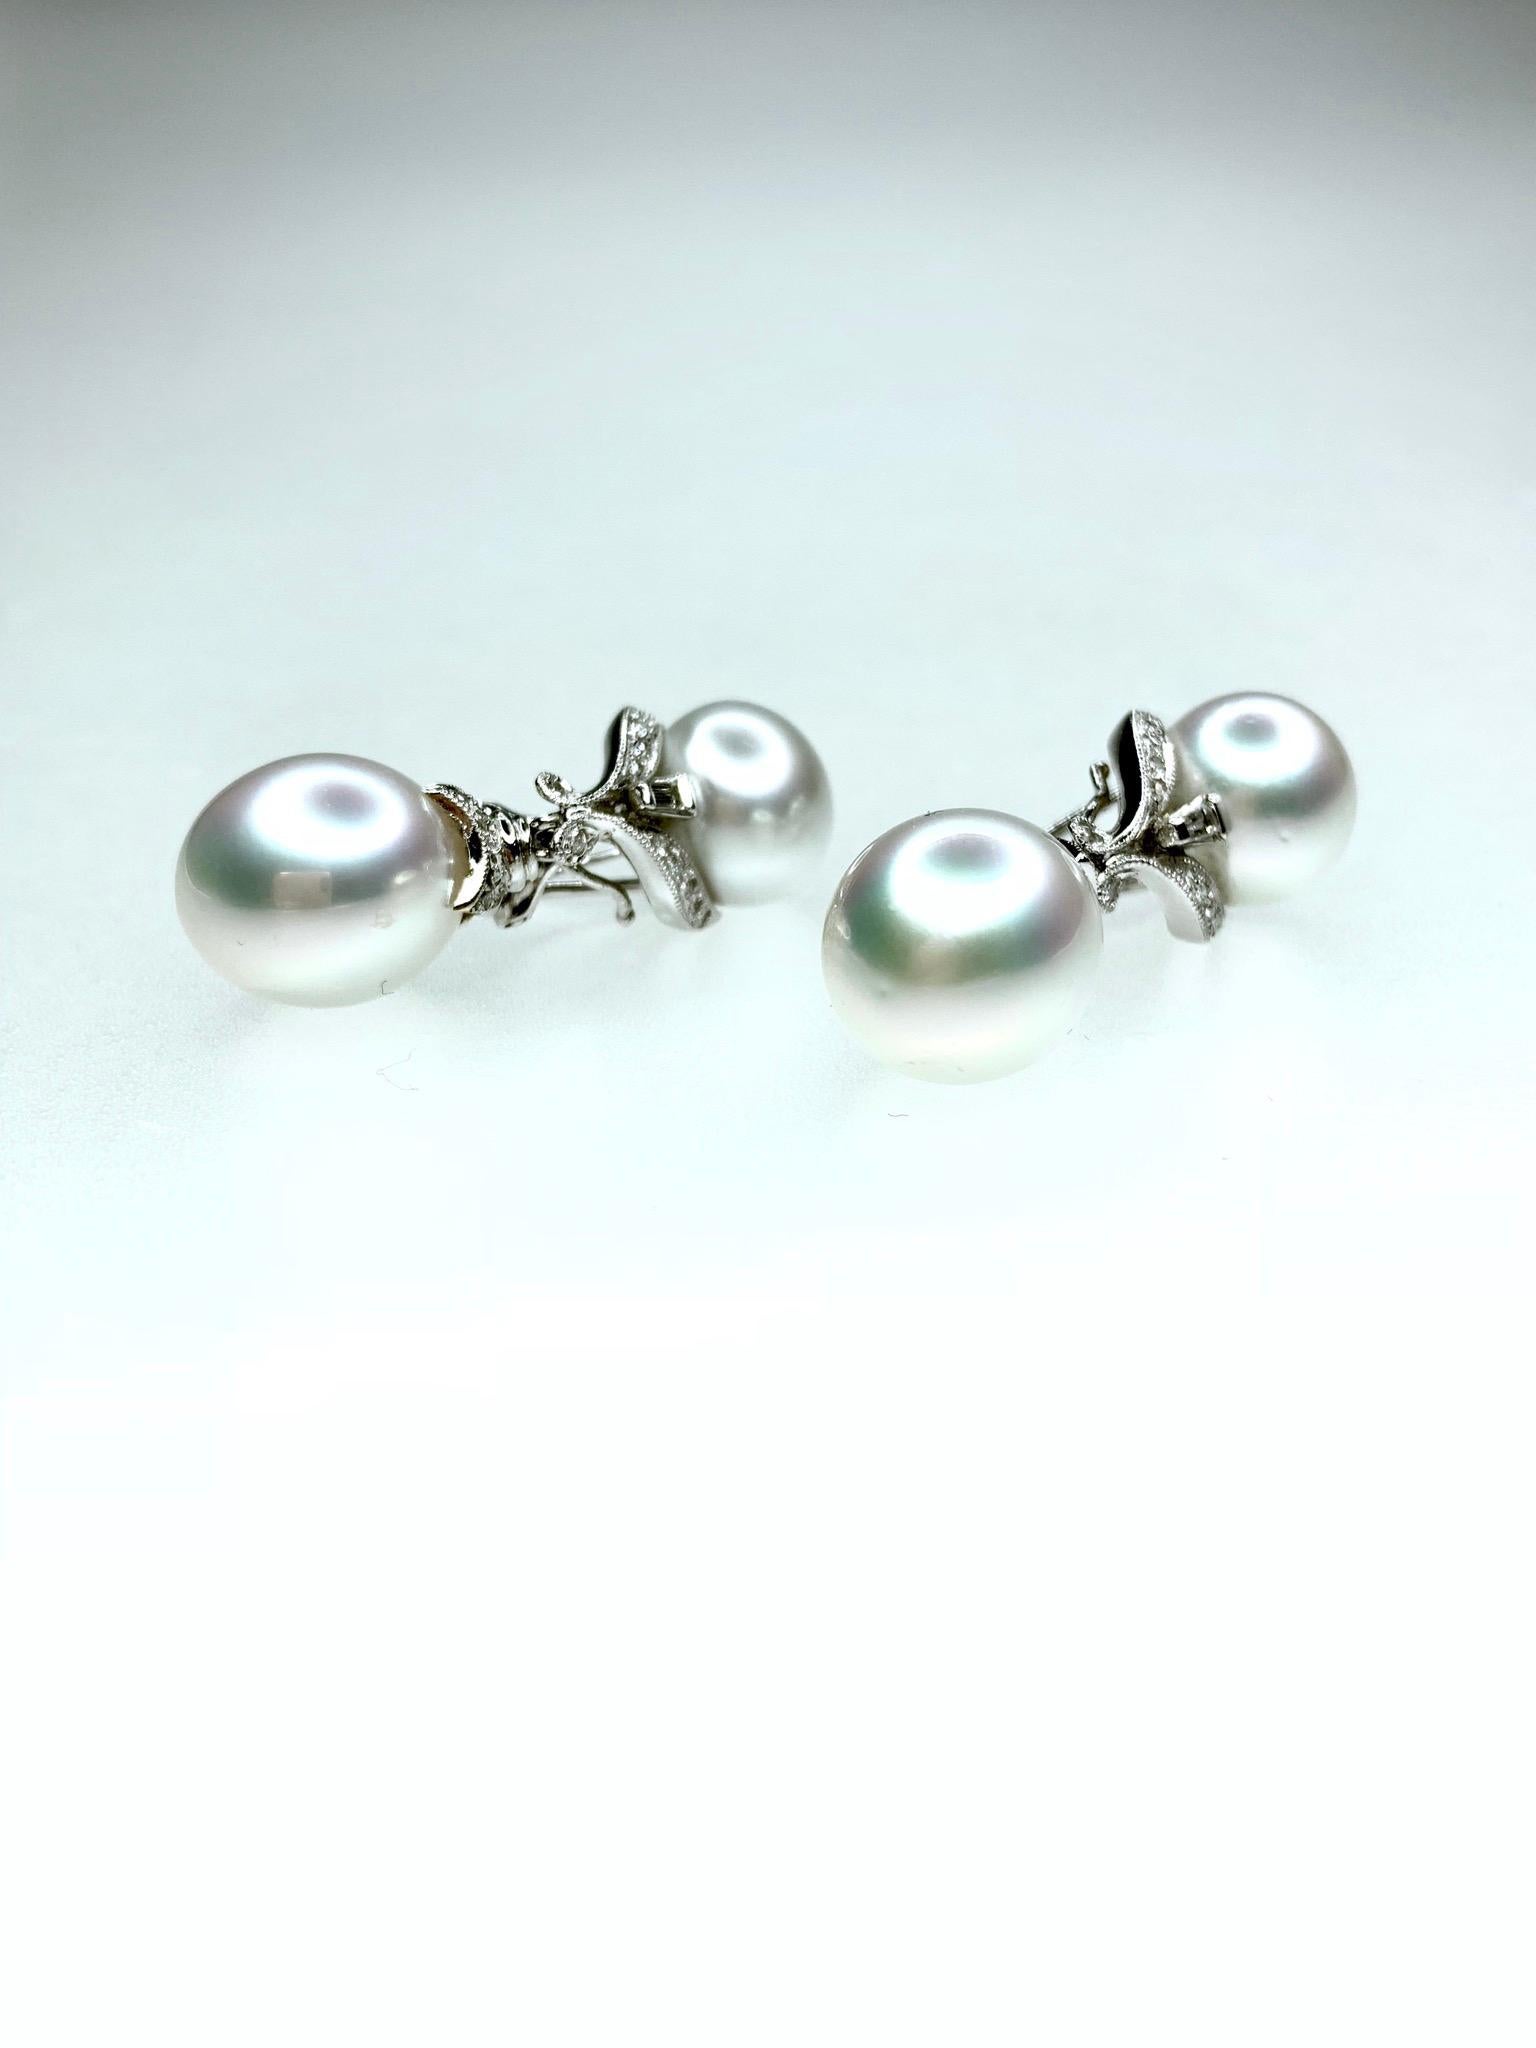 A Pair of Button and Pear Shaped Australian Cultured Pearl & Diamond Earrings. Drops detachable. 